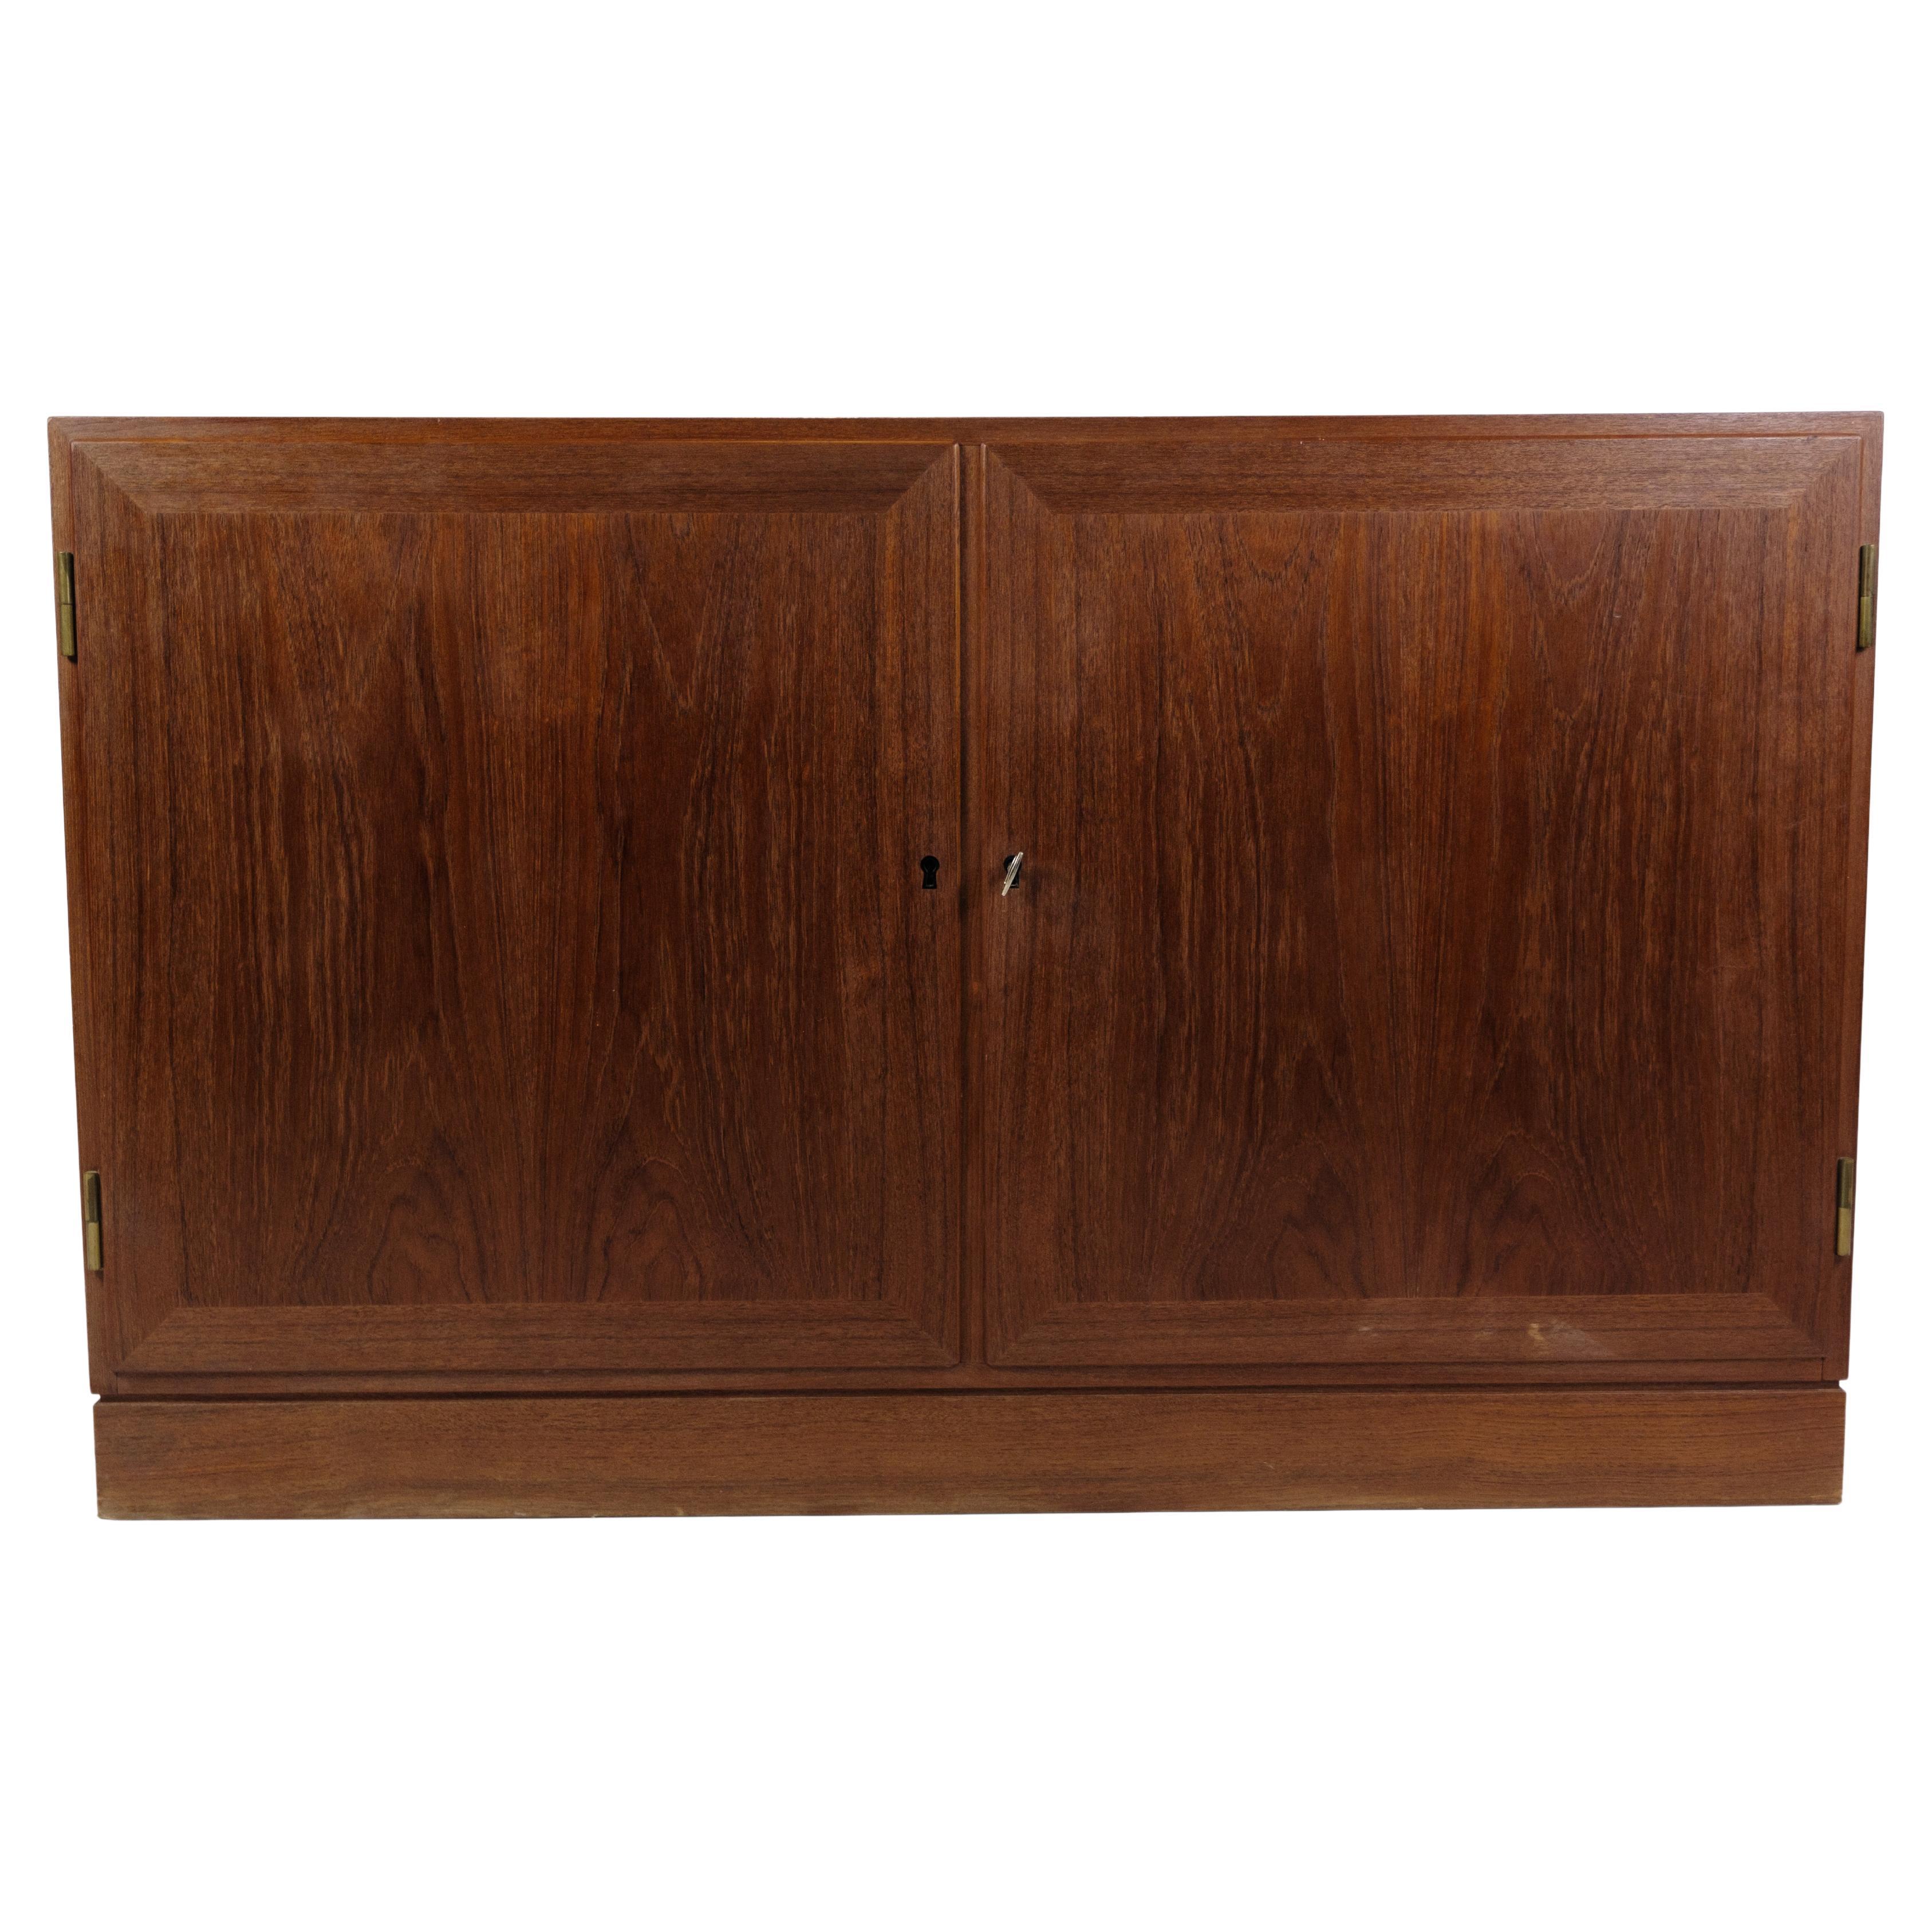 Smaill Side Board Made In Teak, Danish Design From 1960s For Sale